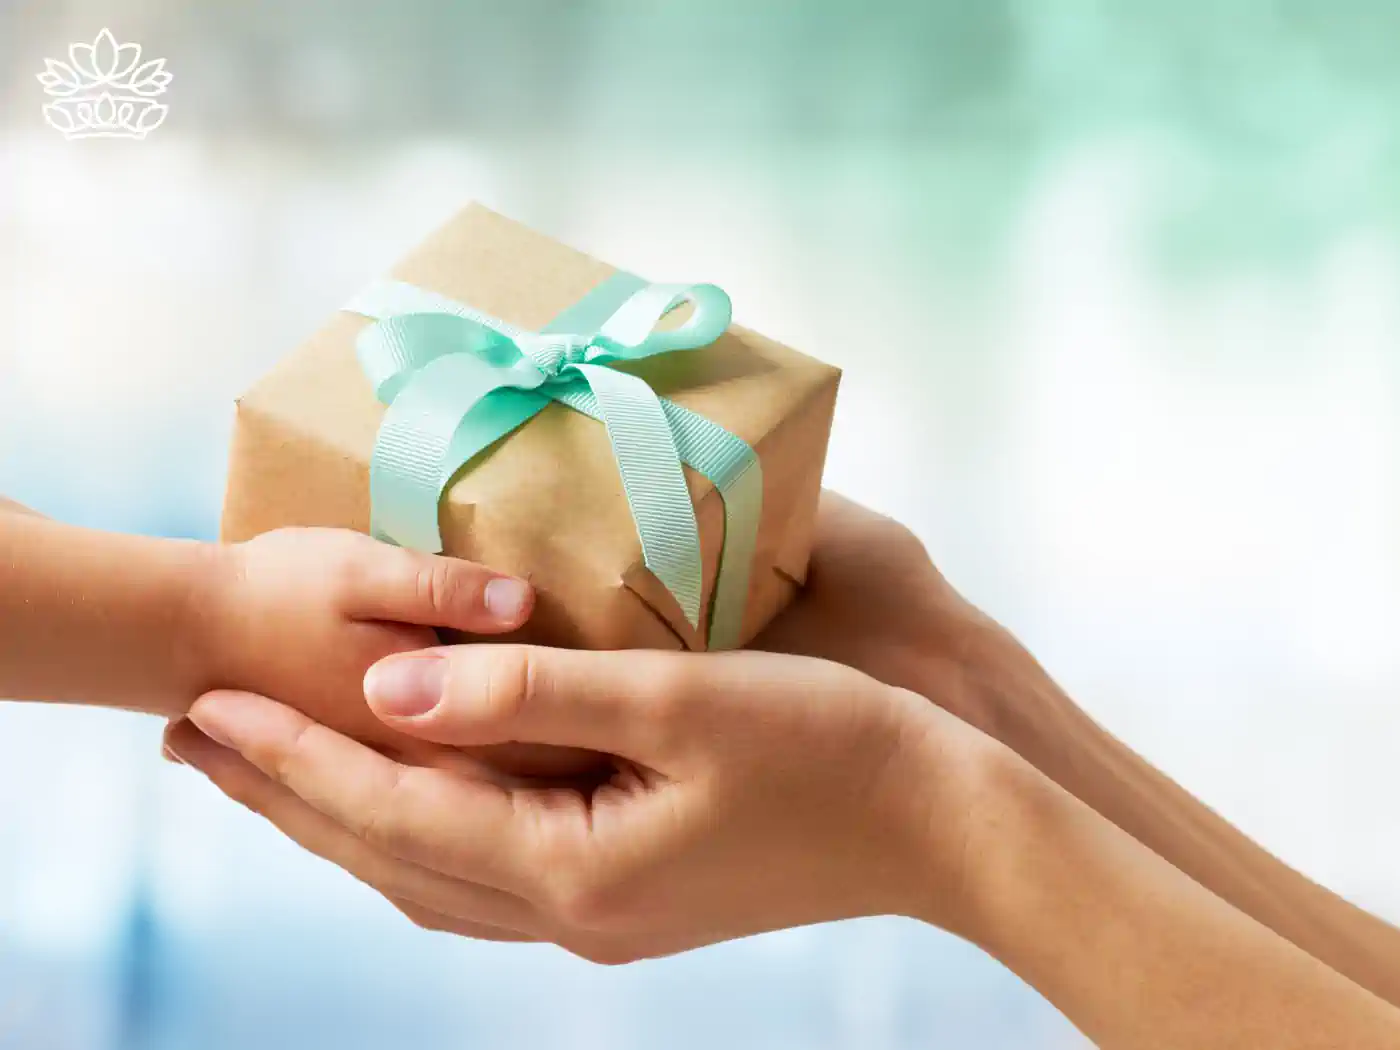 Two hands exchanging a beautifully wrapped gift box with a delicate teal ribbon, symbolizing appreciation and care in gift-giving. Teachers & Educators Gift Boxes. Delivered with Heart. Fabulous Flowers and Gifts